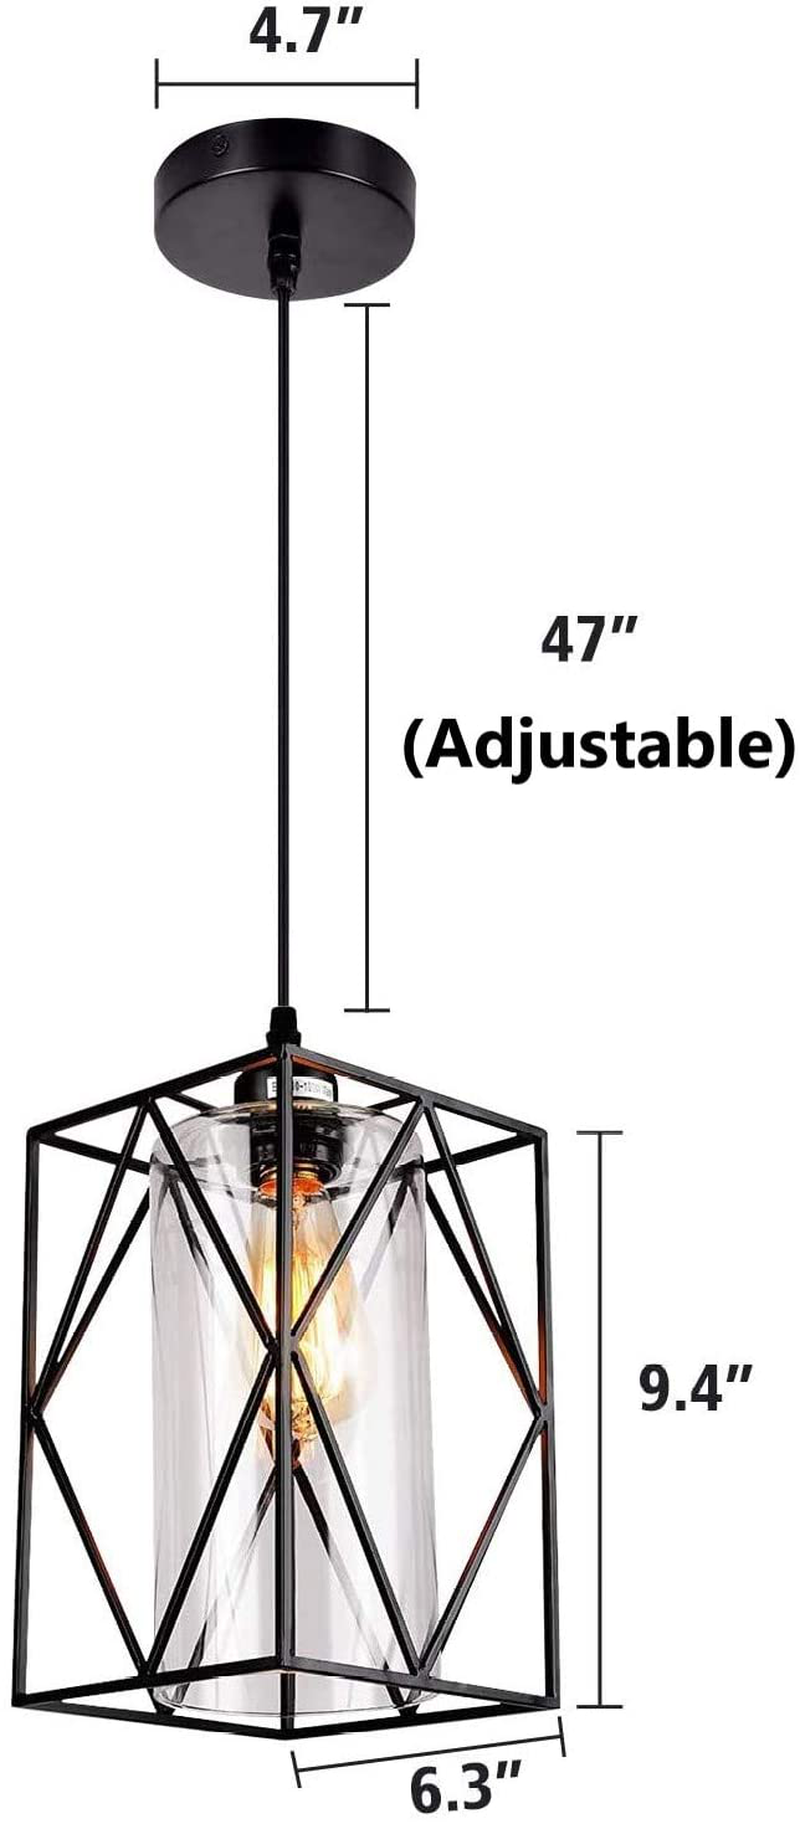 HMVPL Pendant Lighting Fixture, Set of 2 Black Farmhouse Hanging Chandelier Lights with Glass Shade, Mini Industrial Ceiling Lamp for Kitchen Island Dining Room Over Sink Hallway Bedroom